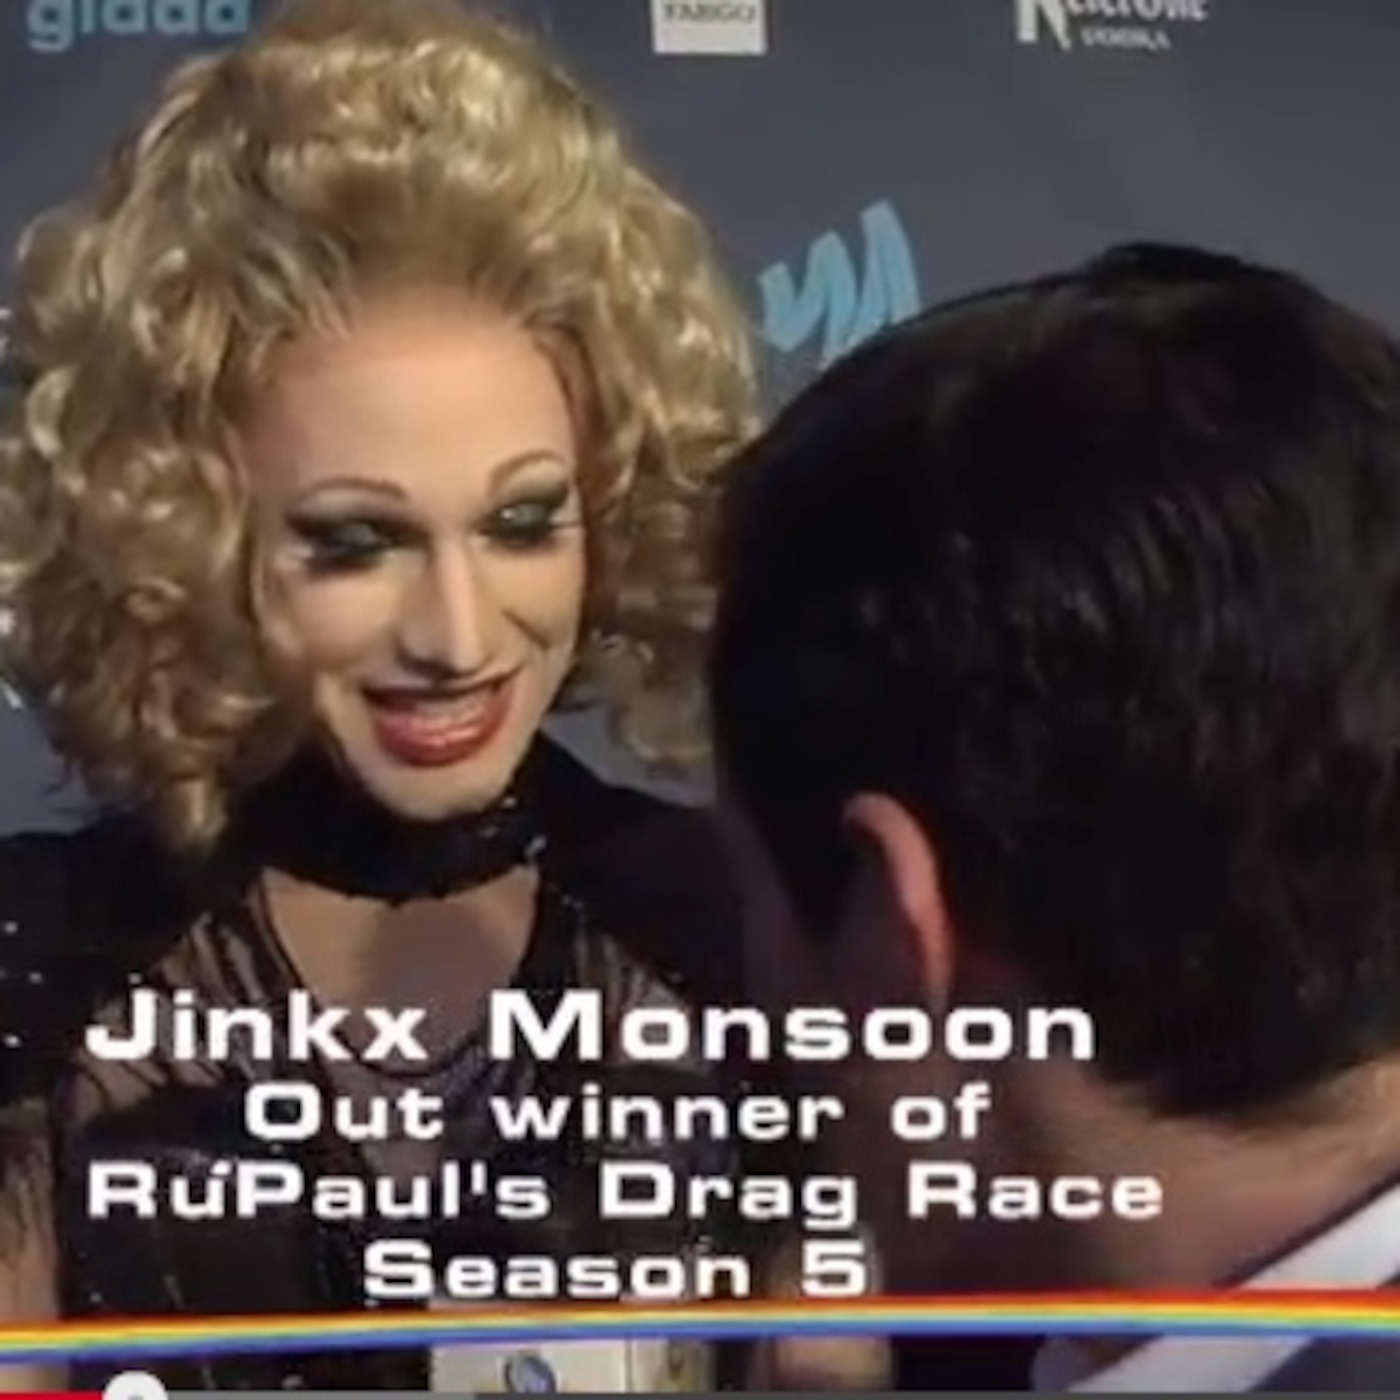 MEL B and Jinkx Monsoon interview at GLAAD Media Awards SF 2013